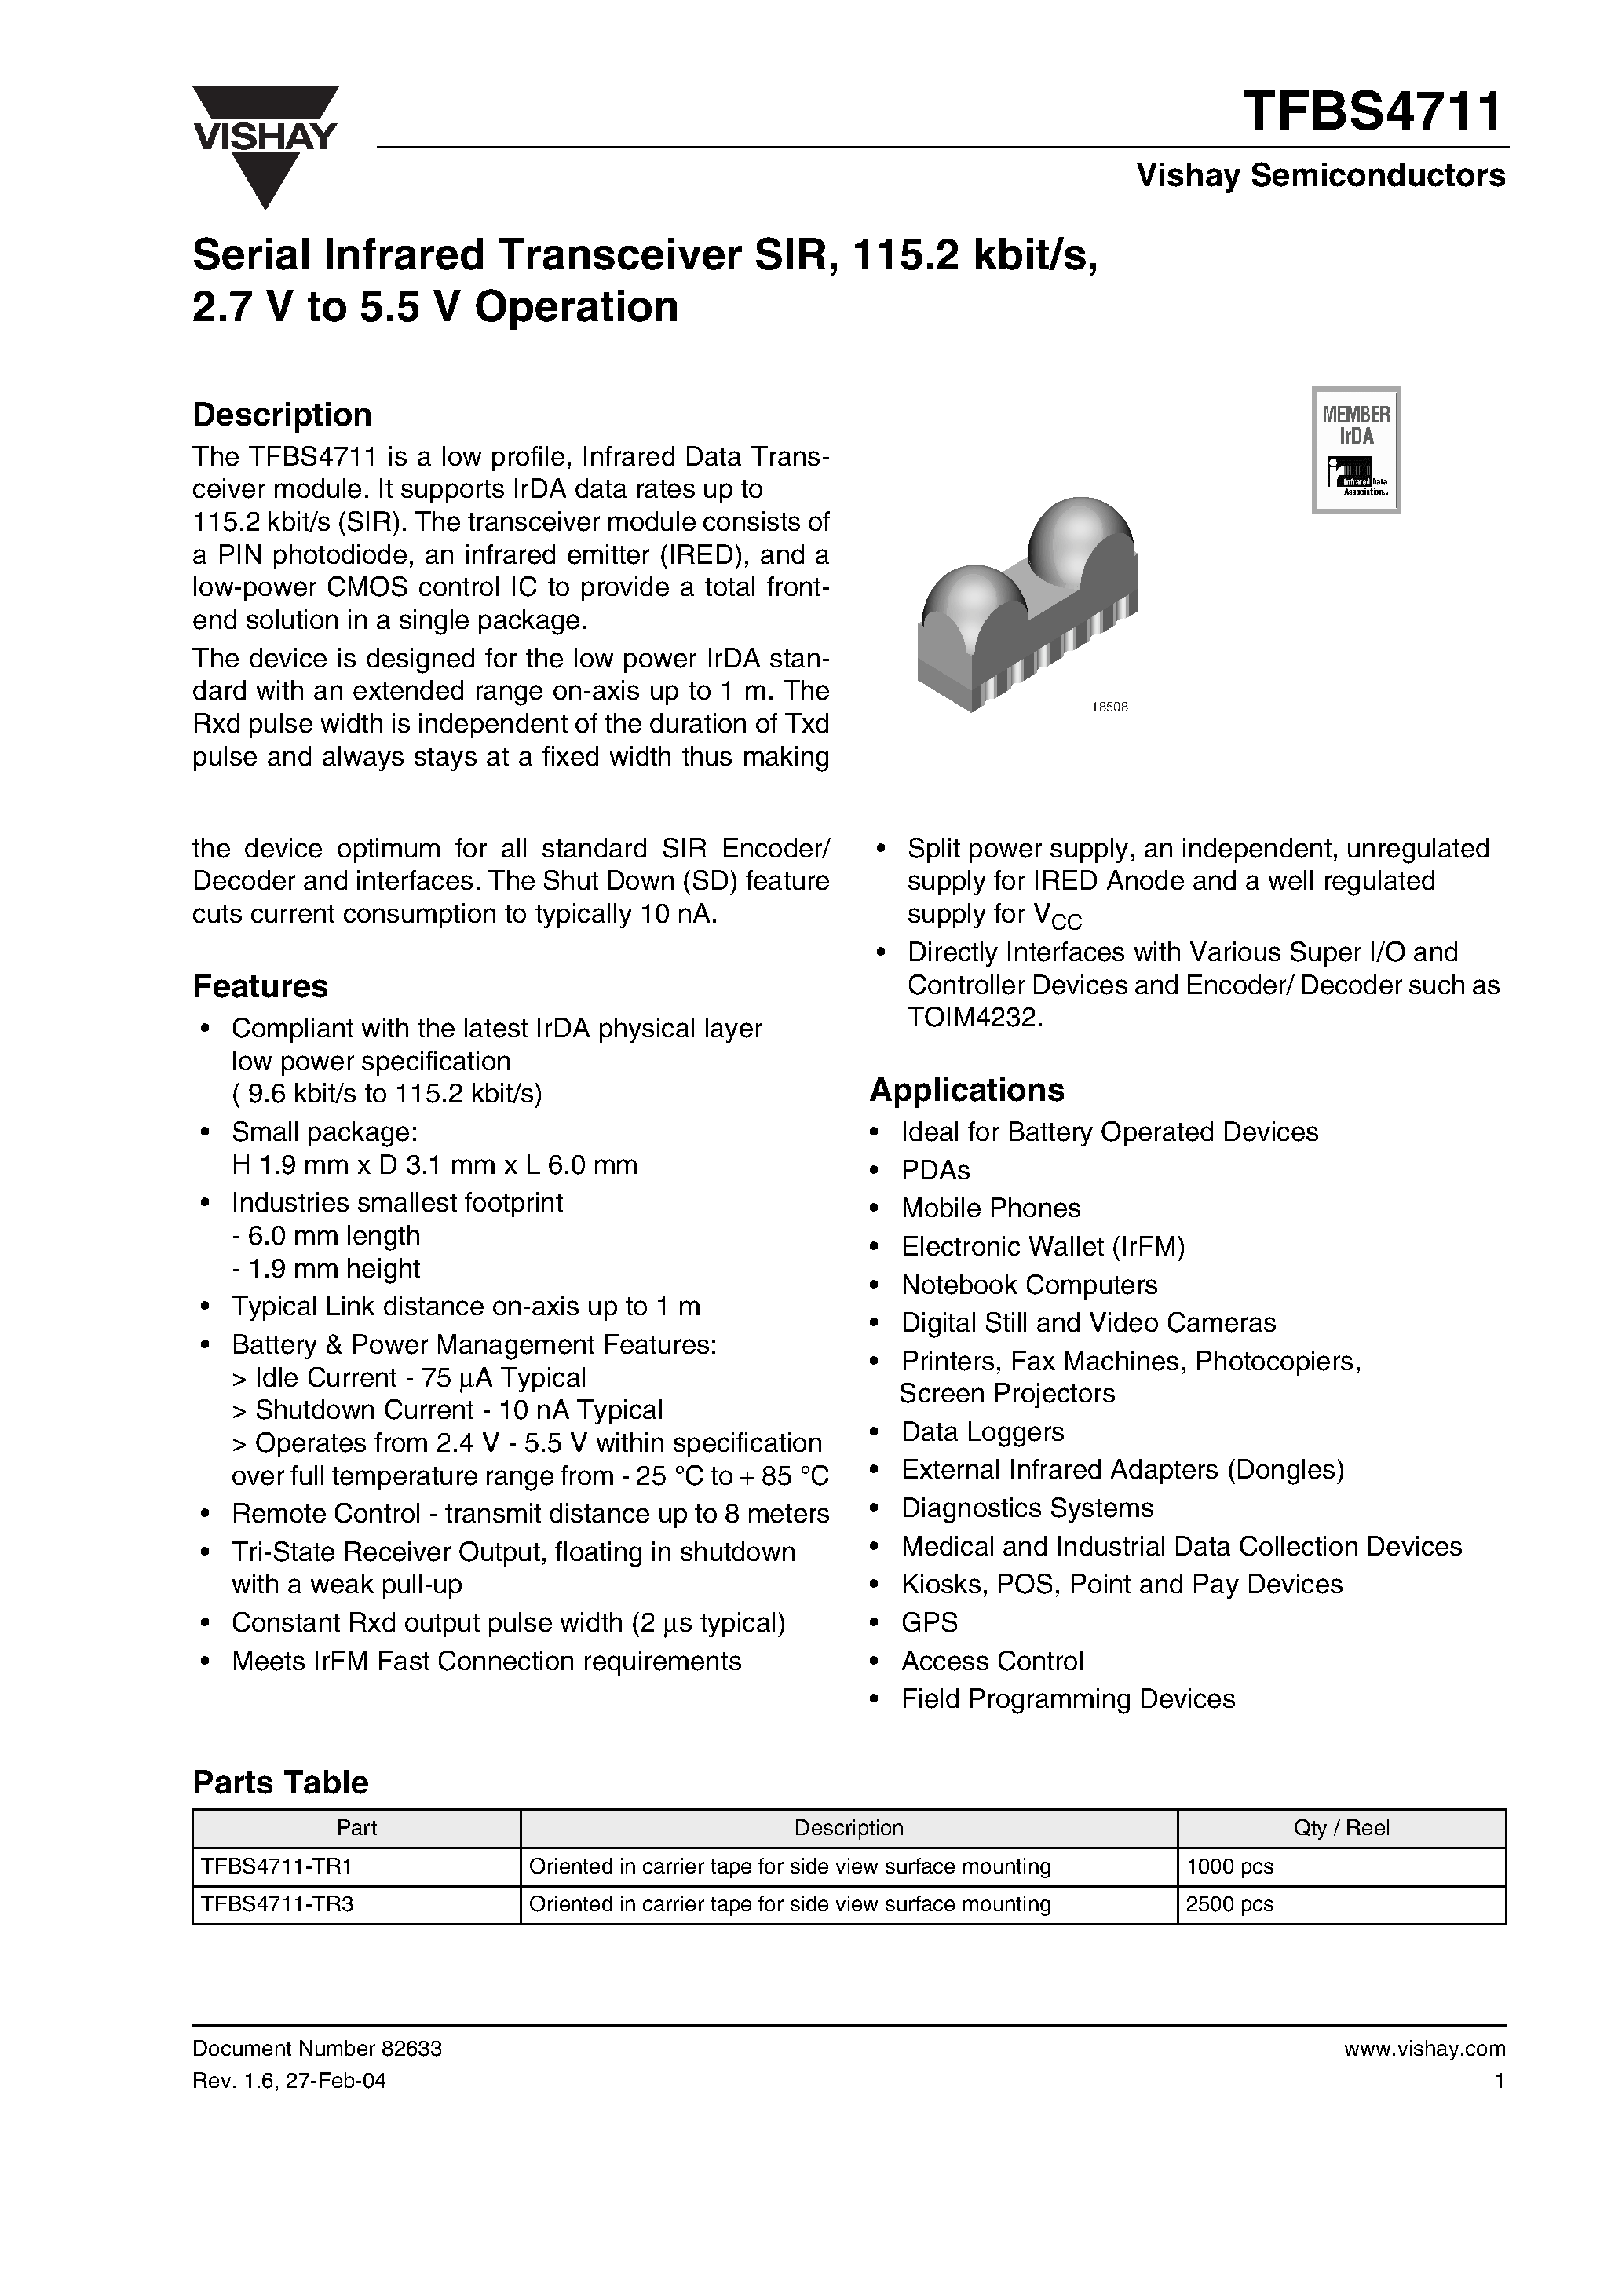 Datasheet TFBS4711-TR1 - Serial Infrared Transceiver SIR/ 115.2 kbit/s/ 2.7 V to 5.5 V Operation page 1